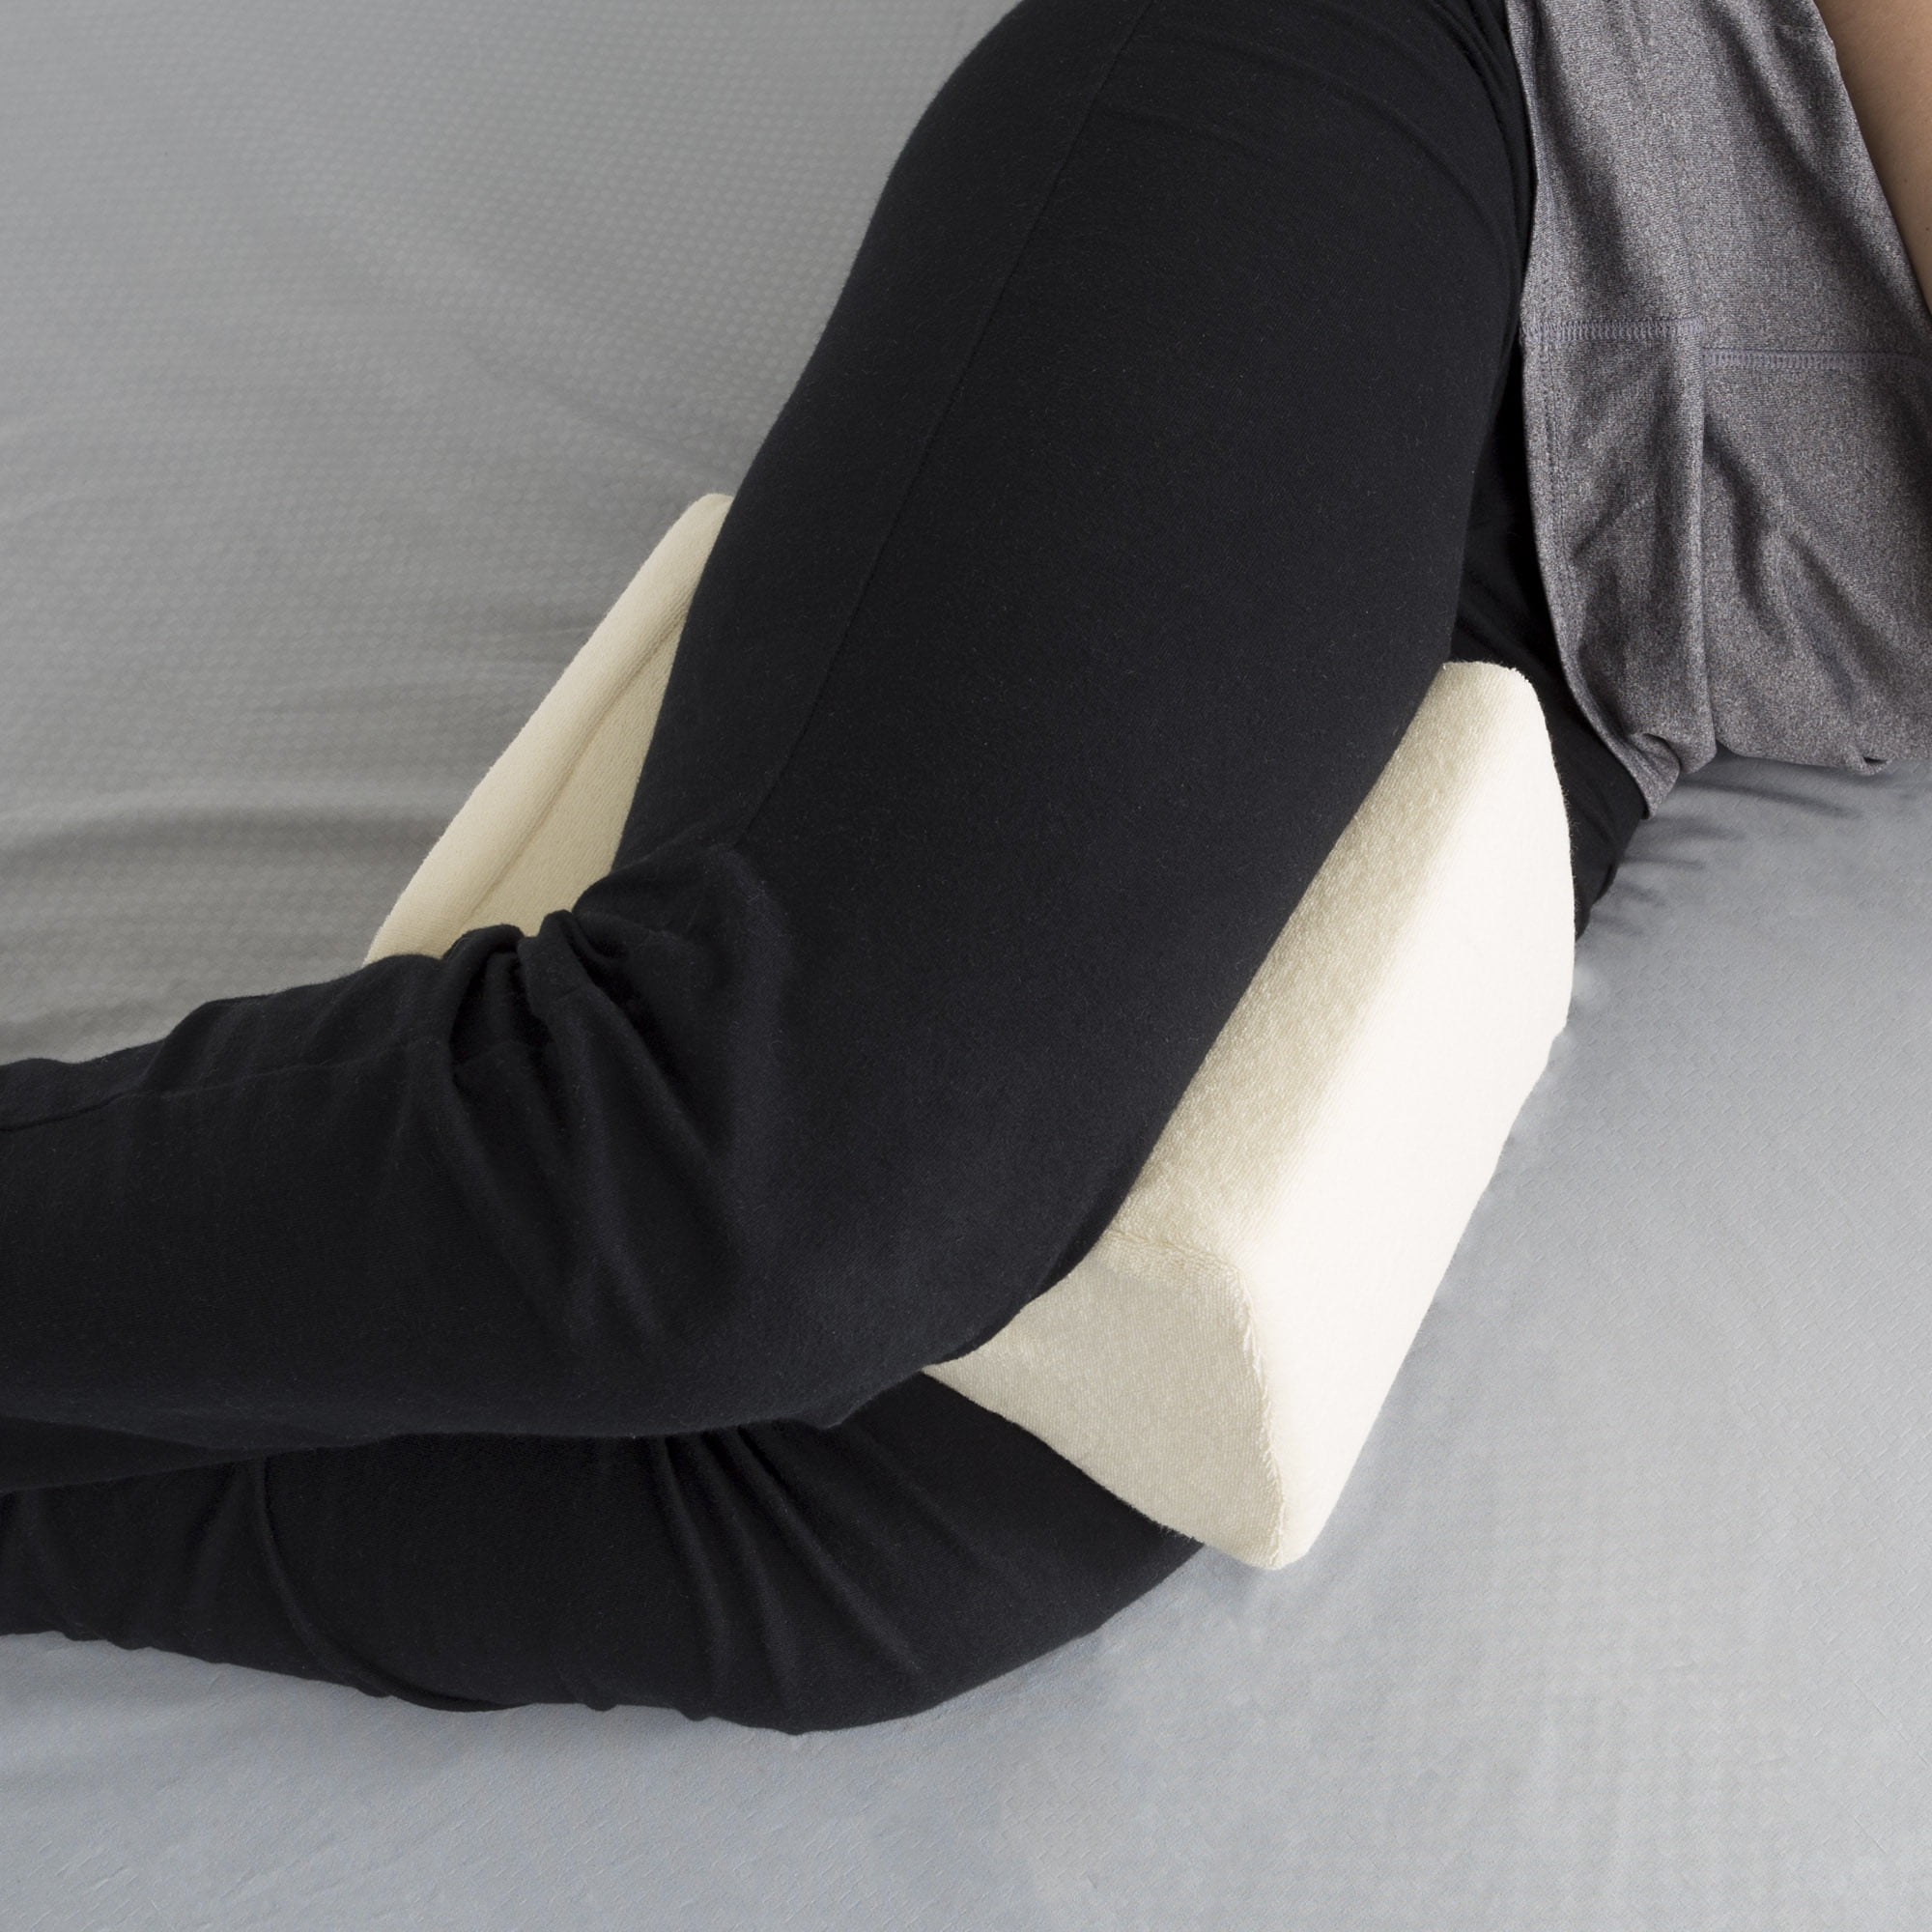 Memory Foam knee pillow - health and beauty - by owner - household